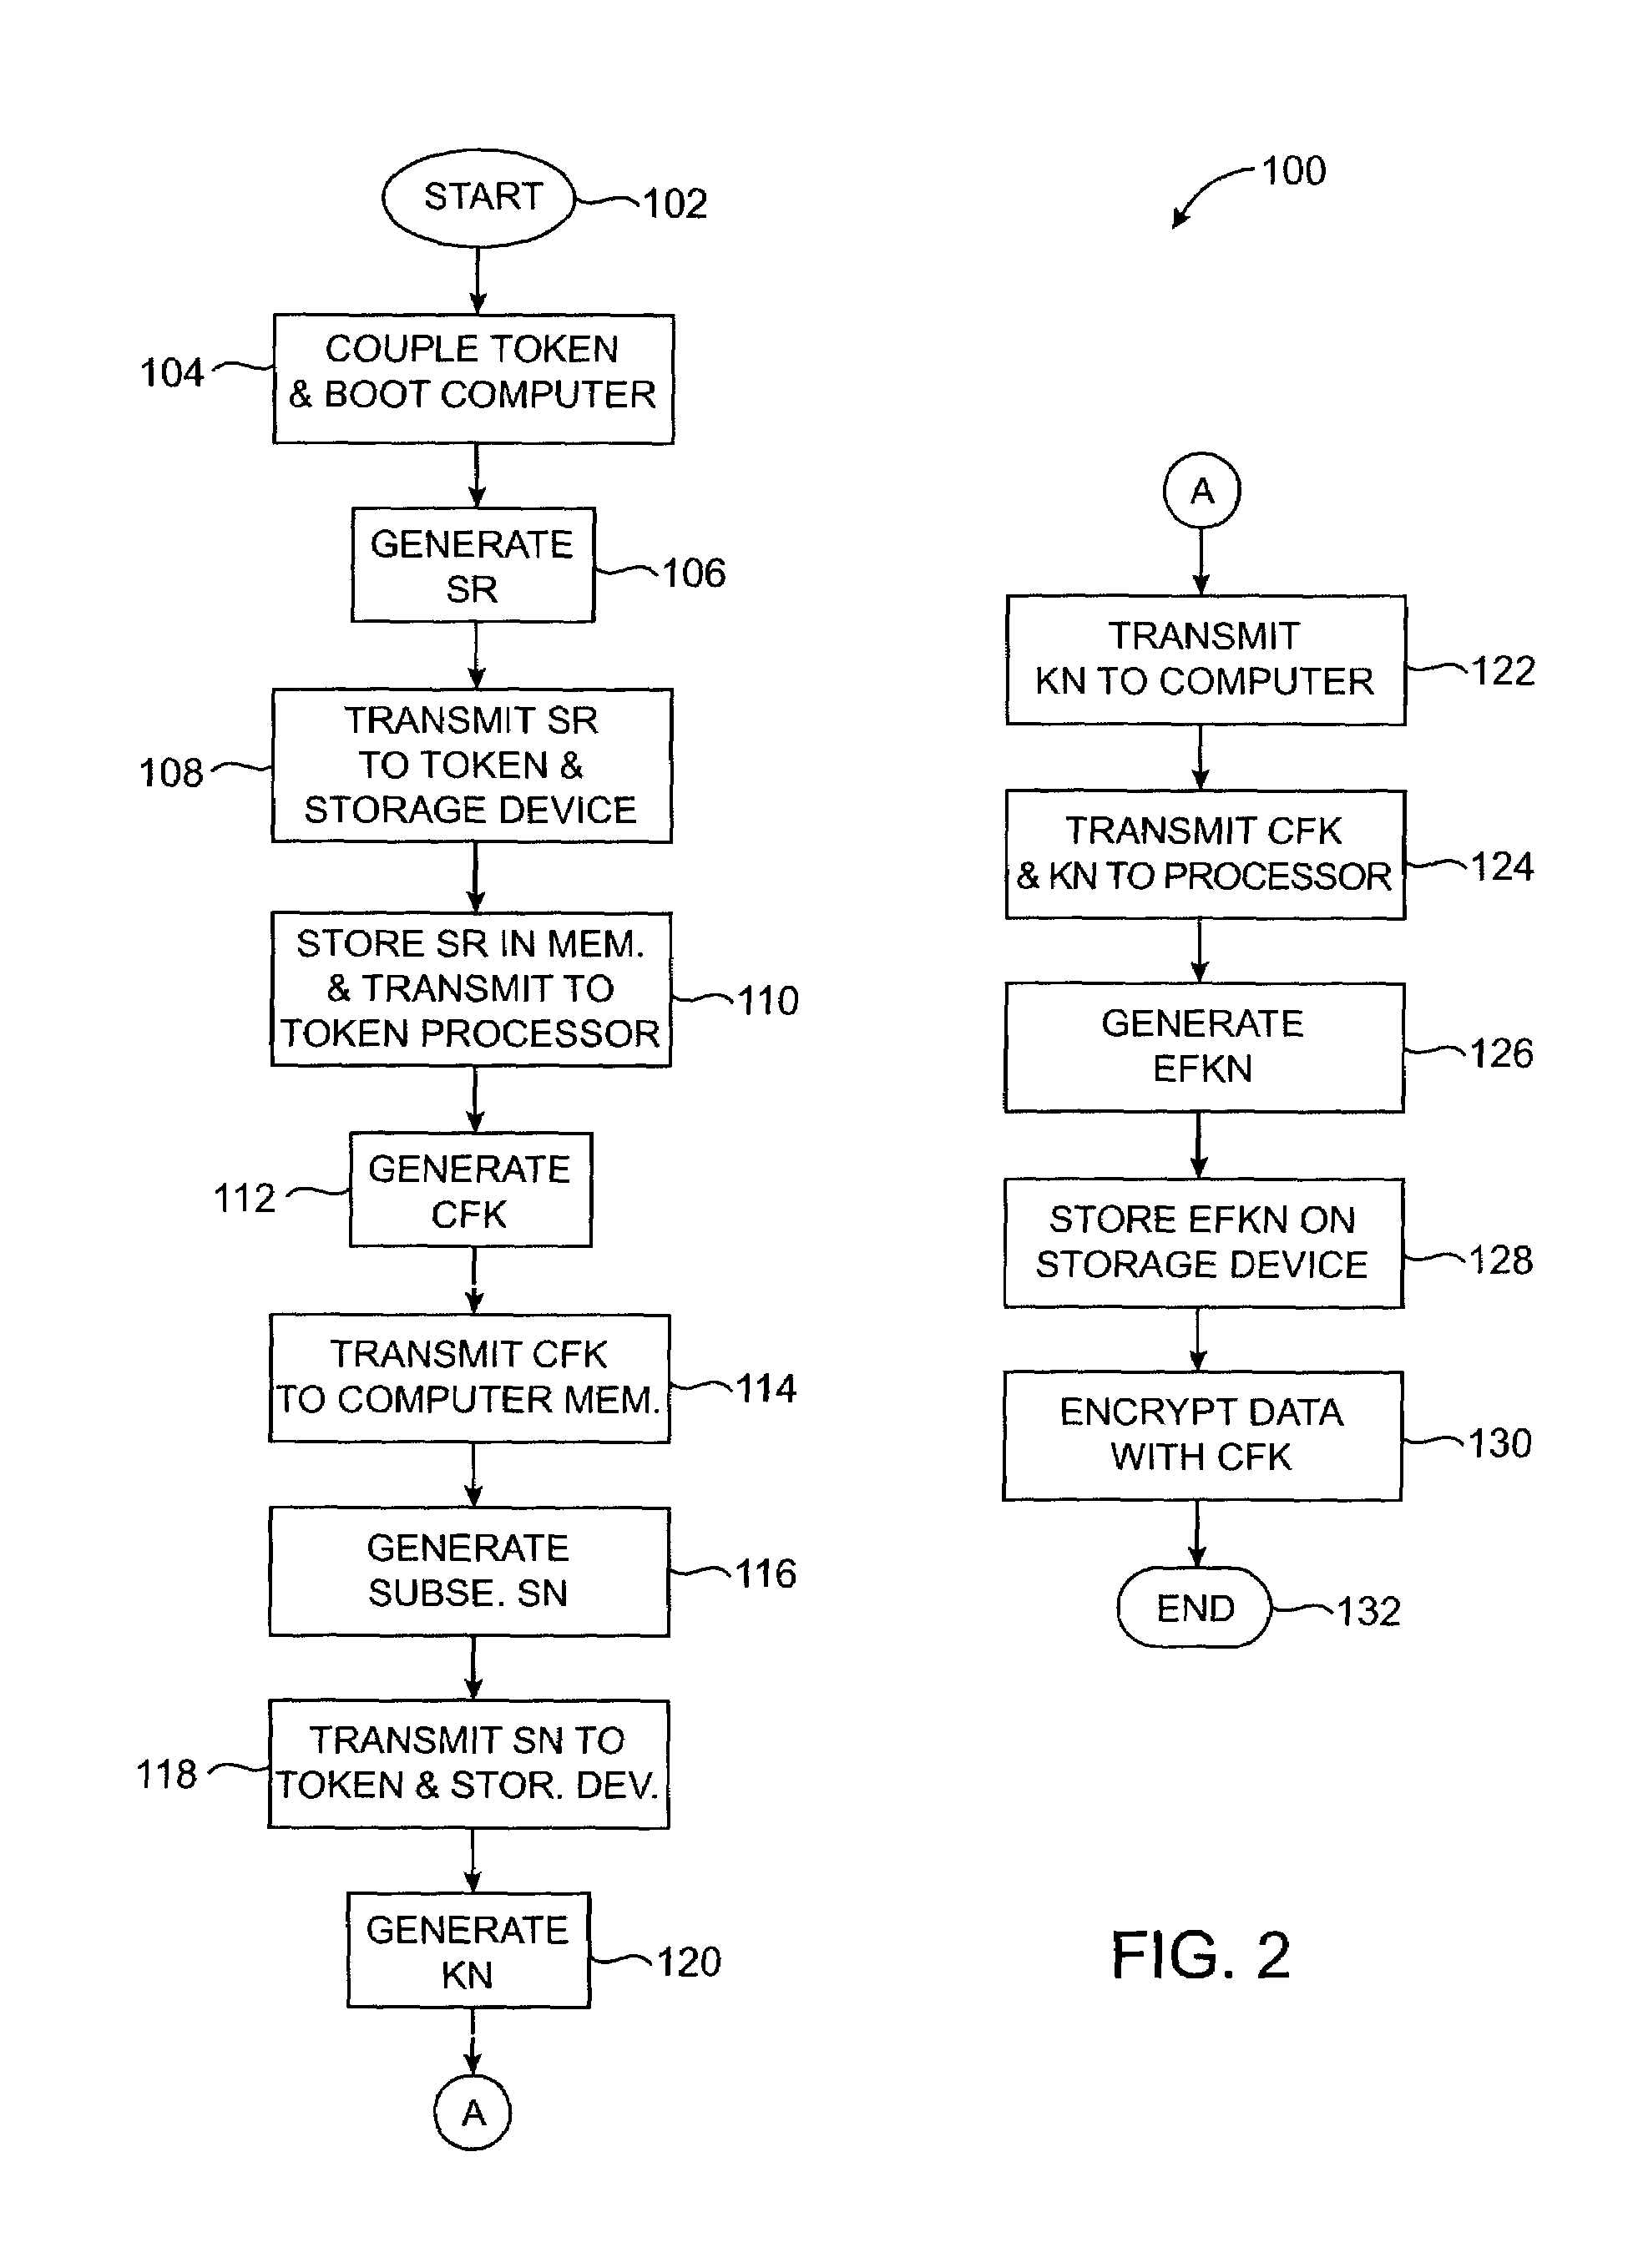 Method and system for controlling access to data stored on a data storage device